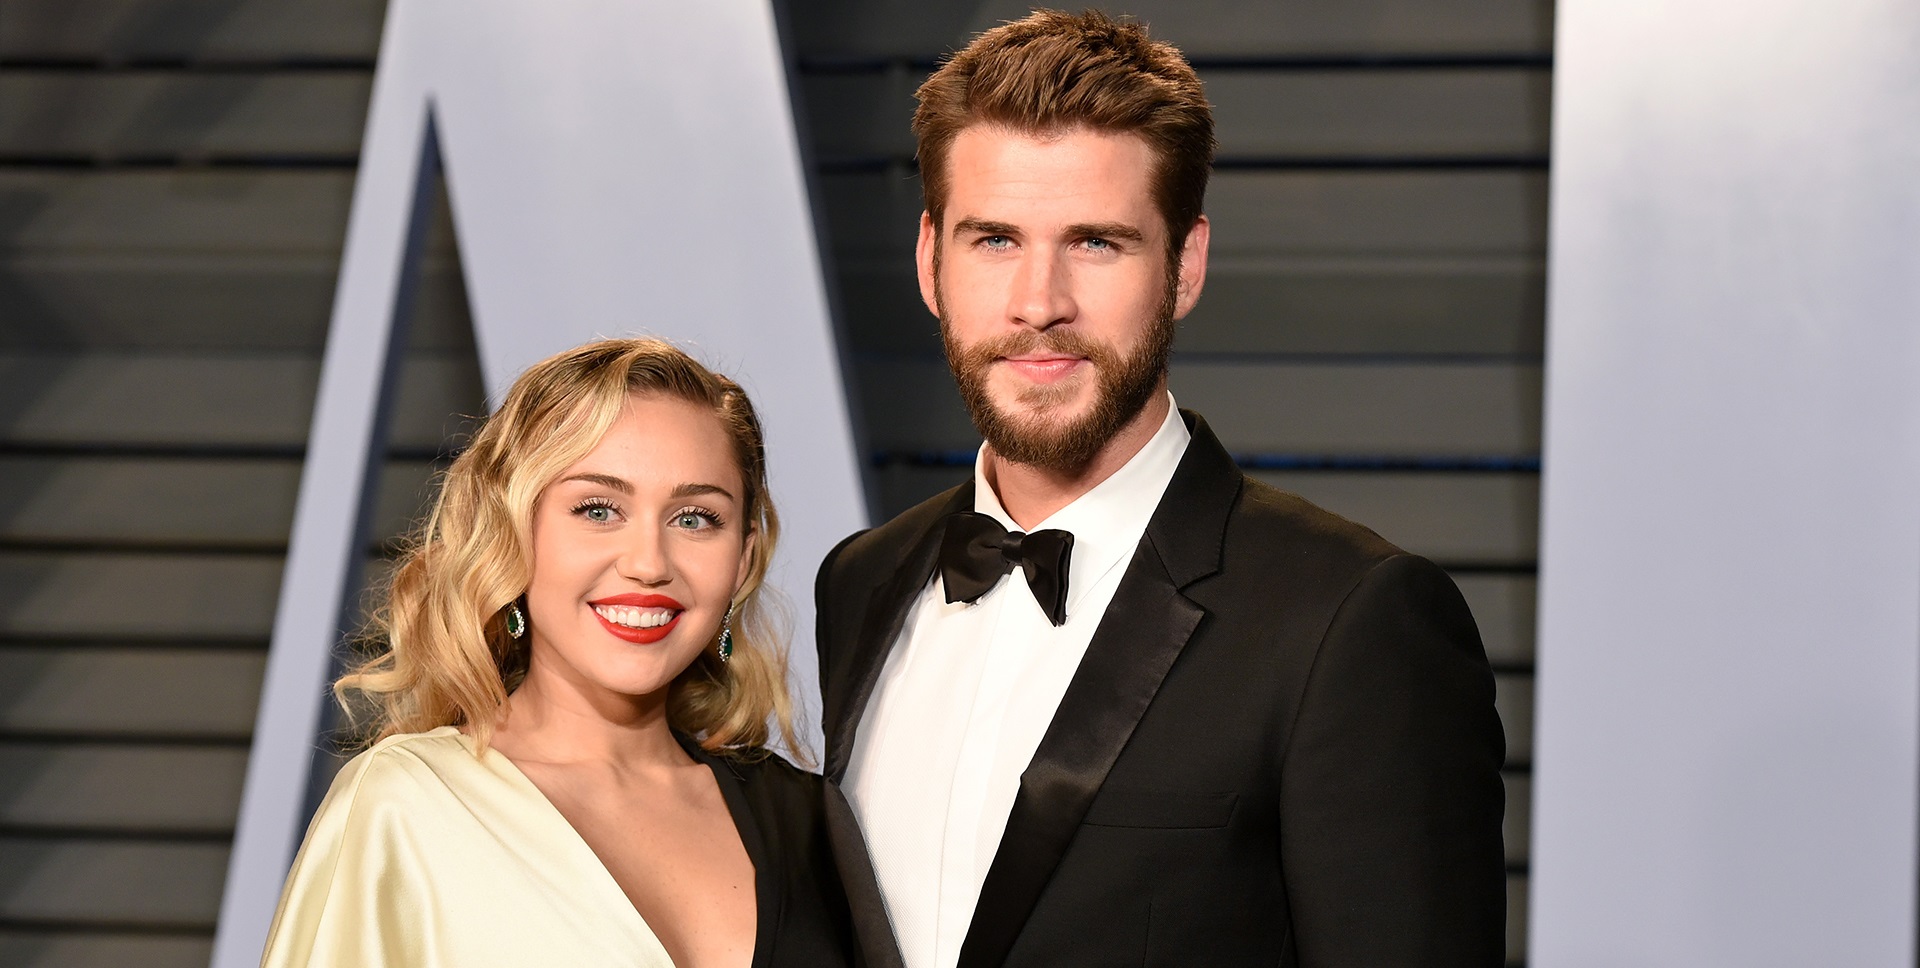 Miley Cyrus and Liam Hemsworth Split Less Than a Year After Their Marriage!